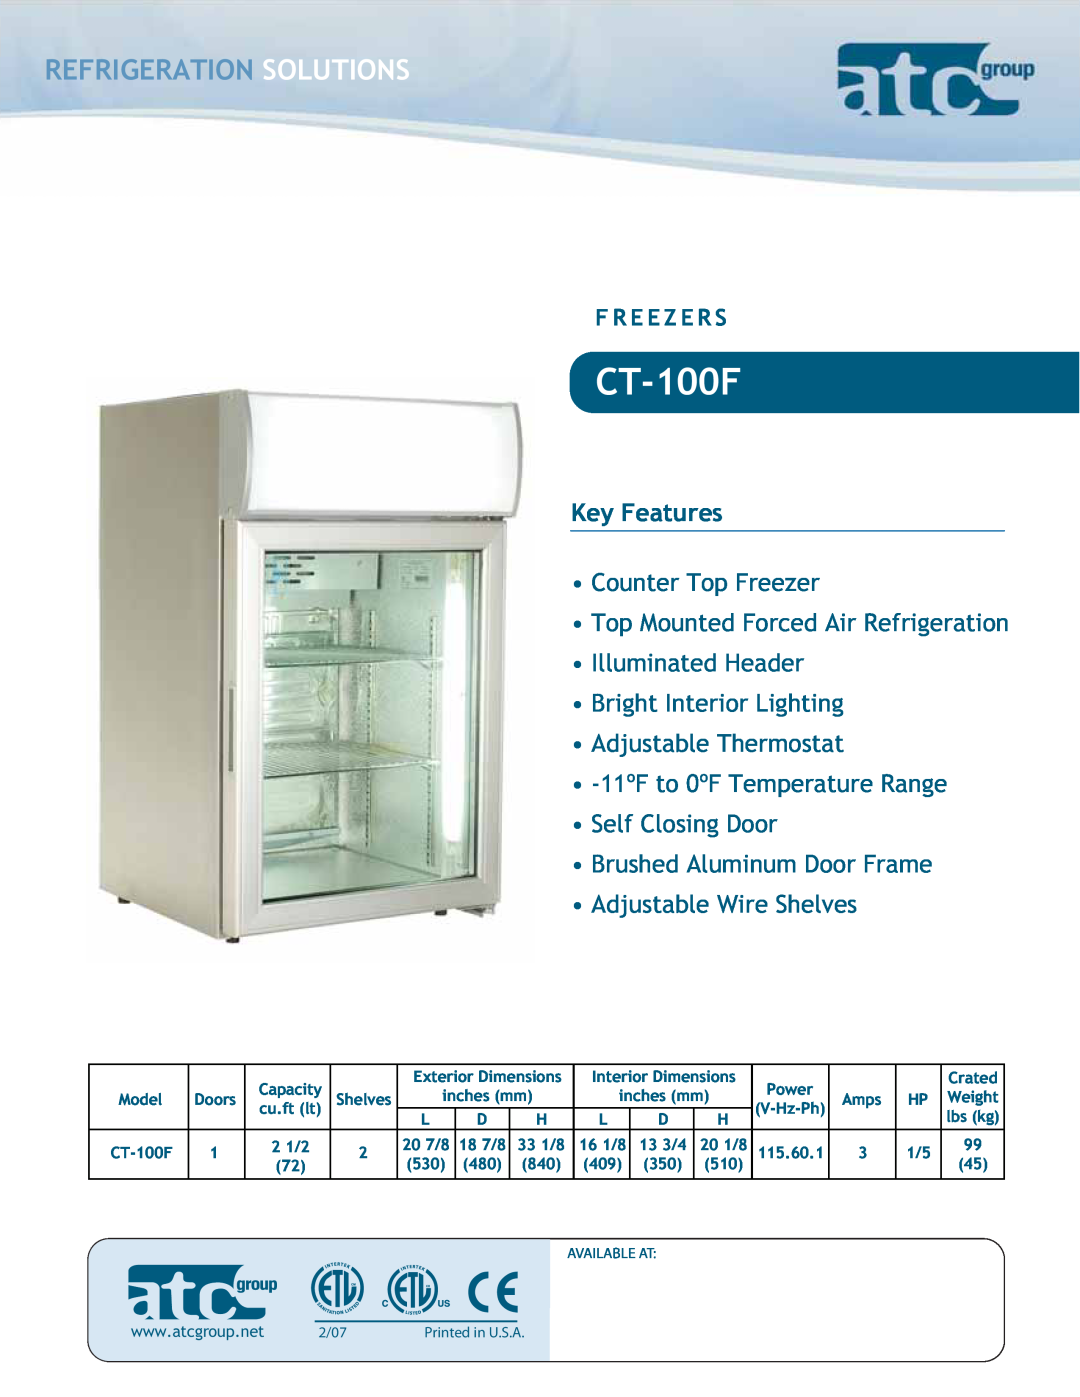 ATC Group CT-100F dimensions Refrigeration Solutions, Key Features 